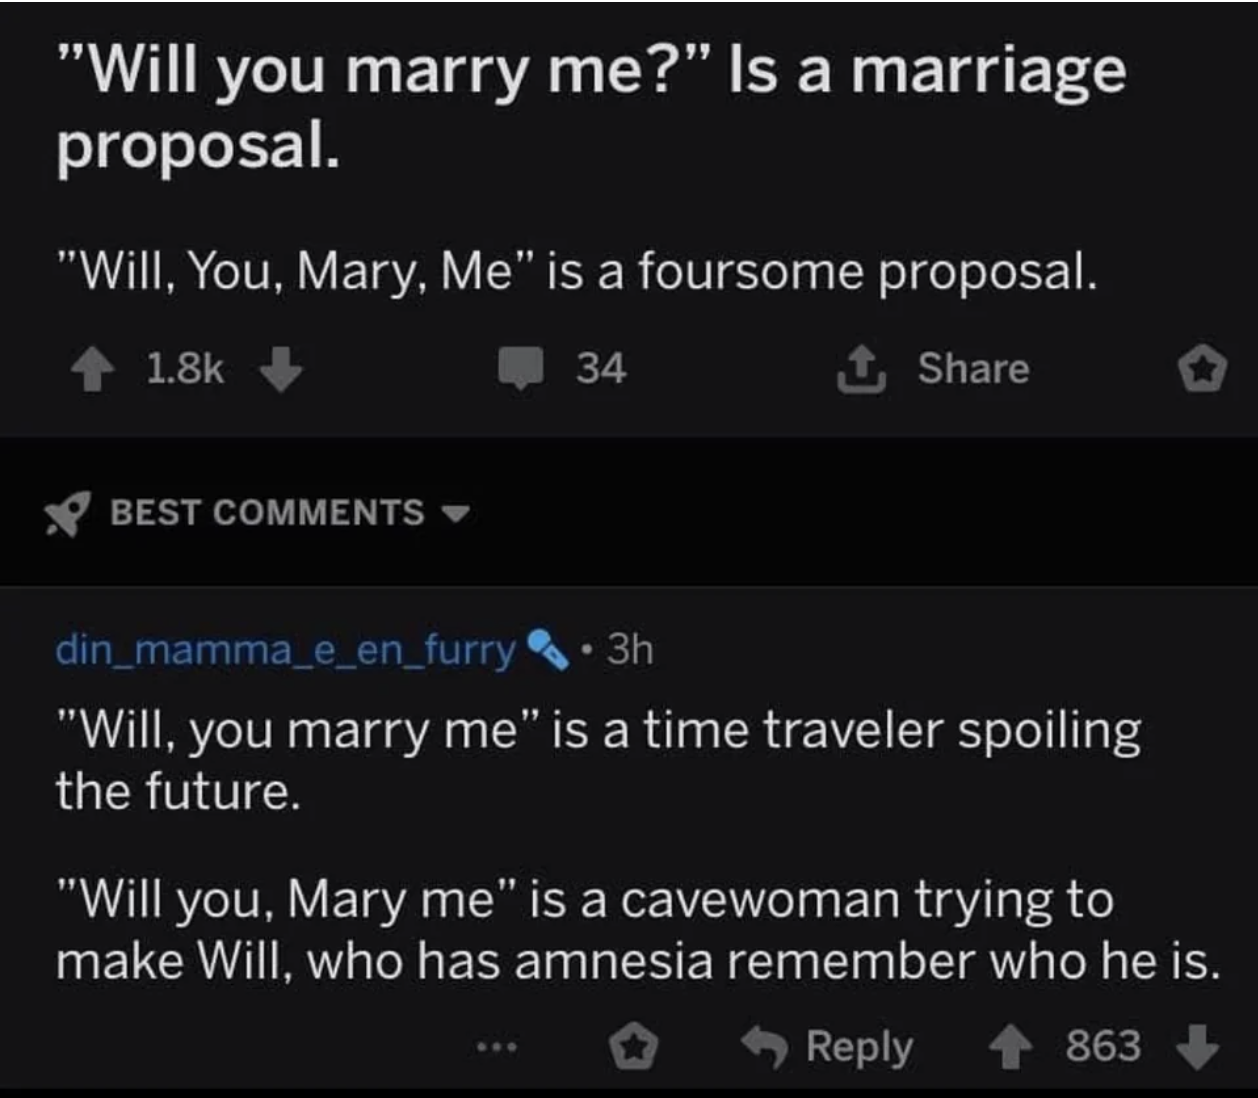 The silly story says "will you marry me" is a foursome proposal in the occasion you damage up the phrases personally; a commenter says "will you, Mary me" is a cavewoman making an are trying to make an amnesiac named Will be acutely aware each and each her and himself